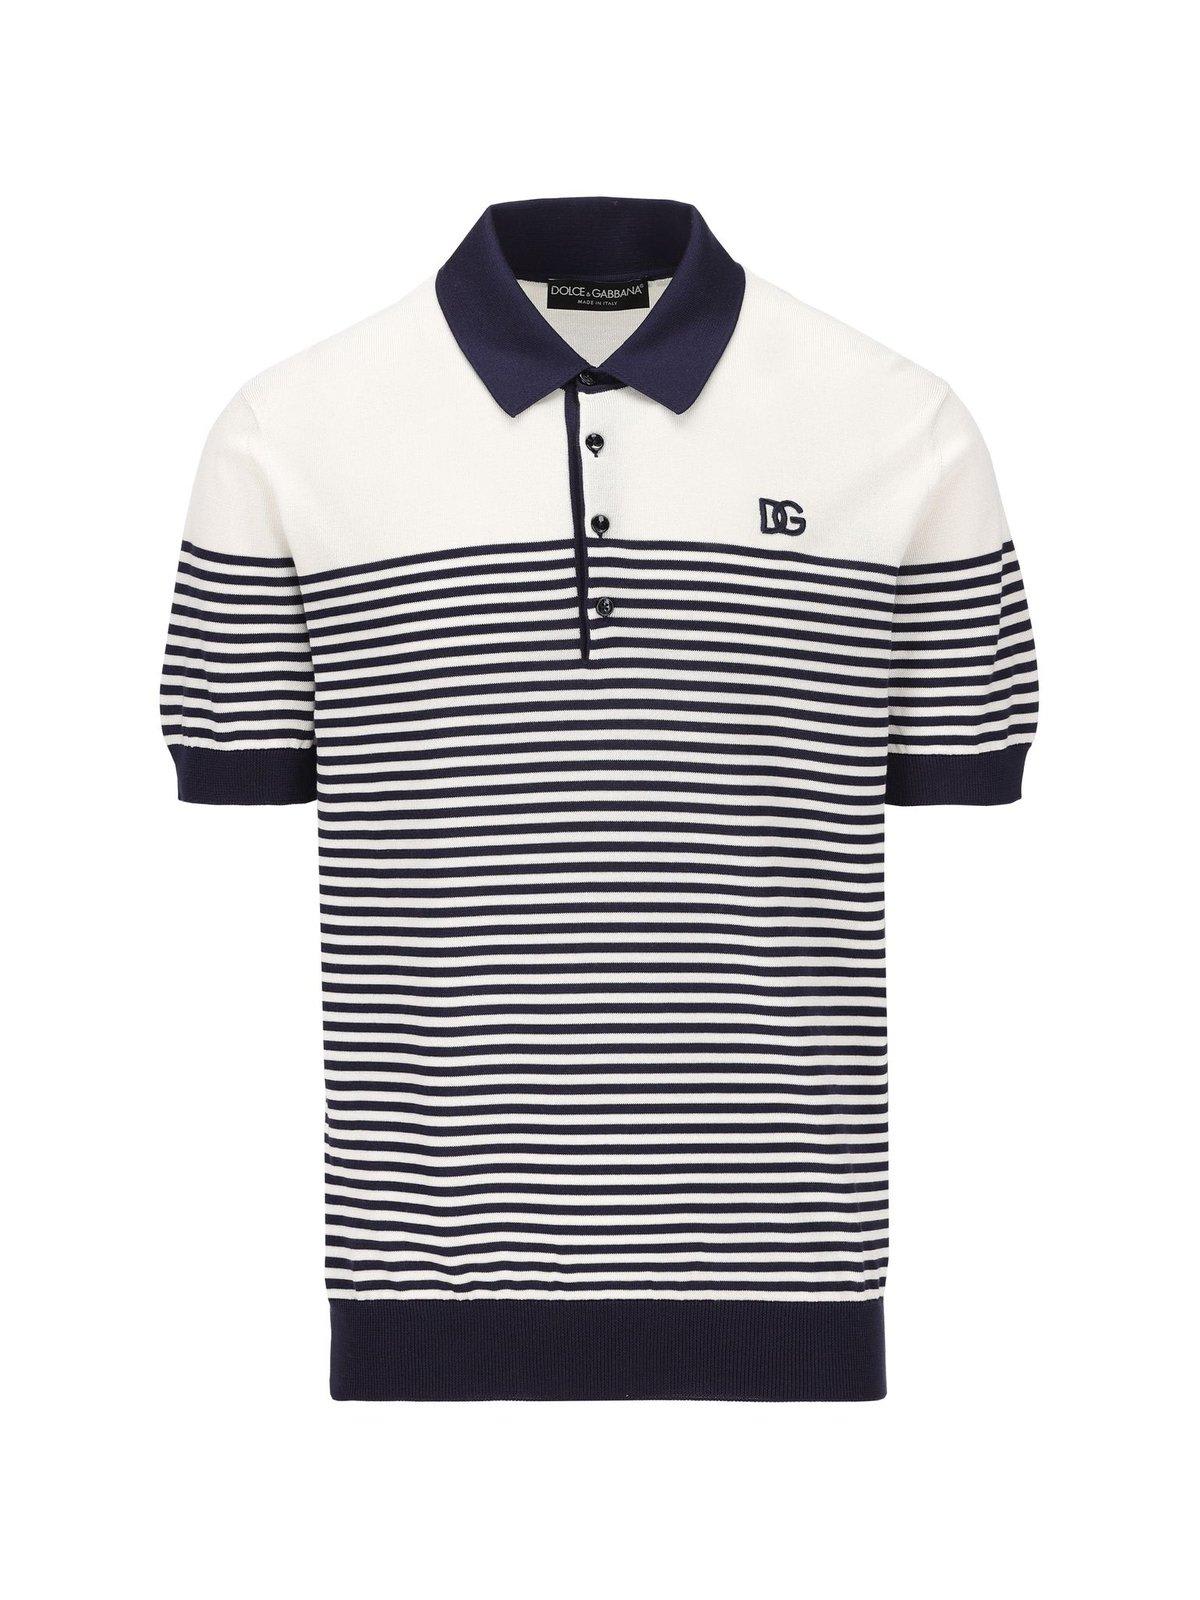 DOLCE & GABBANA DG PATCH STRIPED KNITTED POLO SHIRT